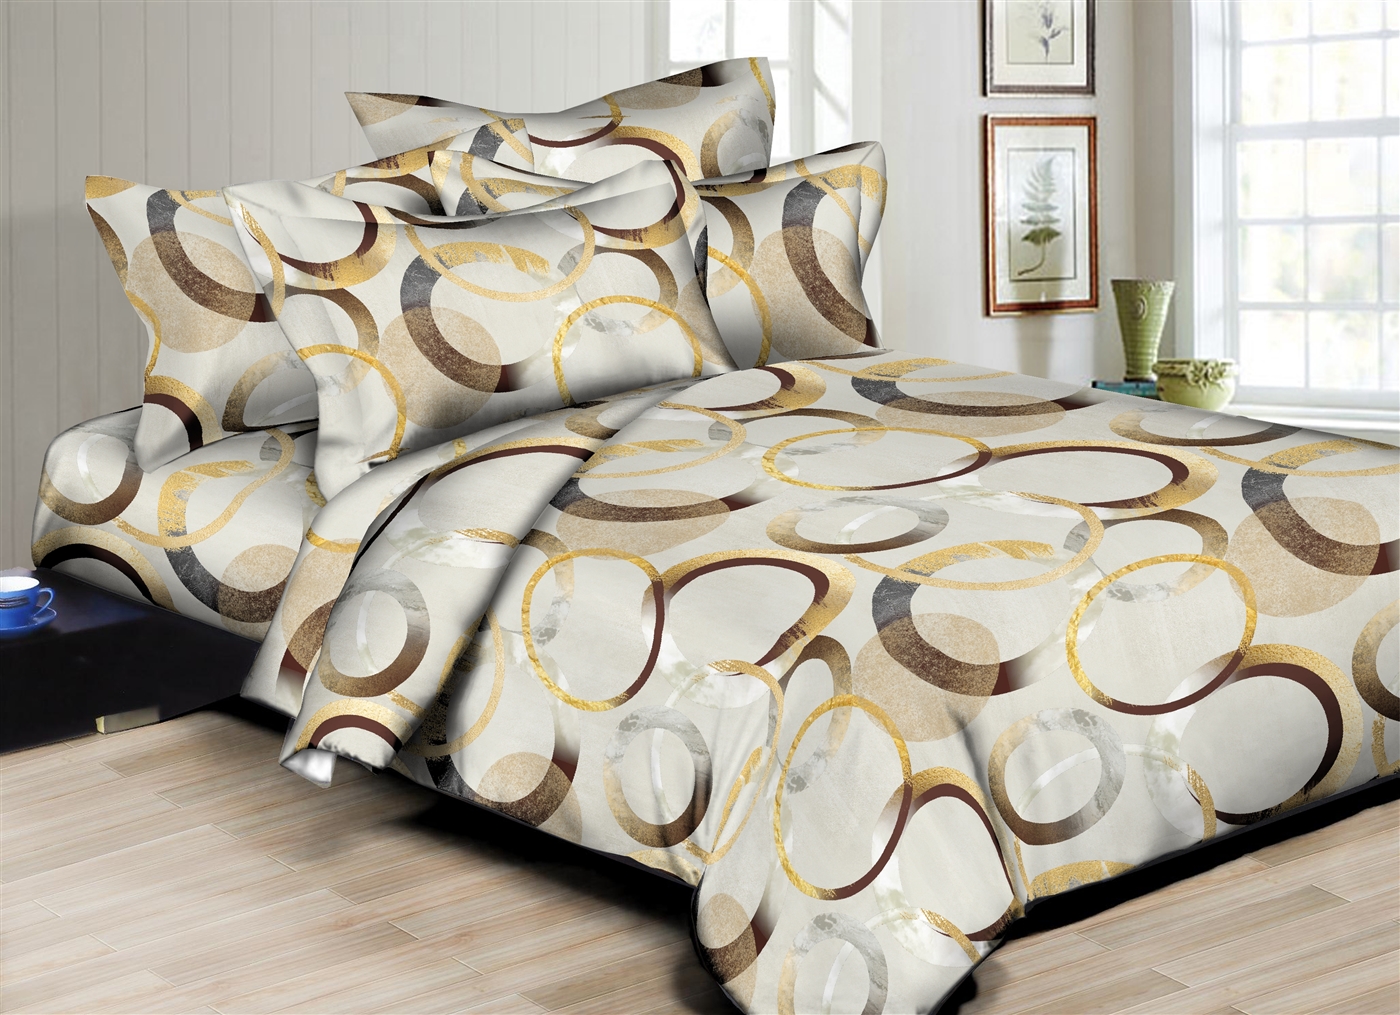 Better Bed Collection: Moonlit Spheres 8PC Bedding Sets - 300 Thread Count